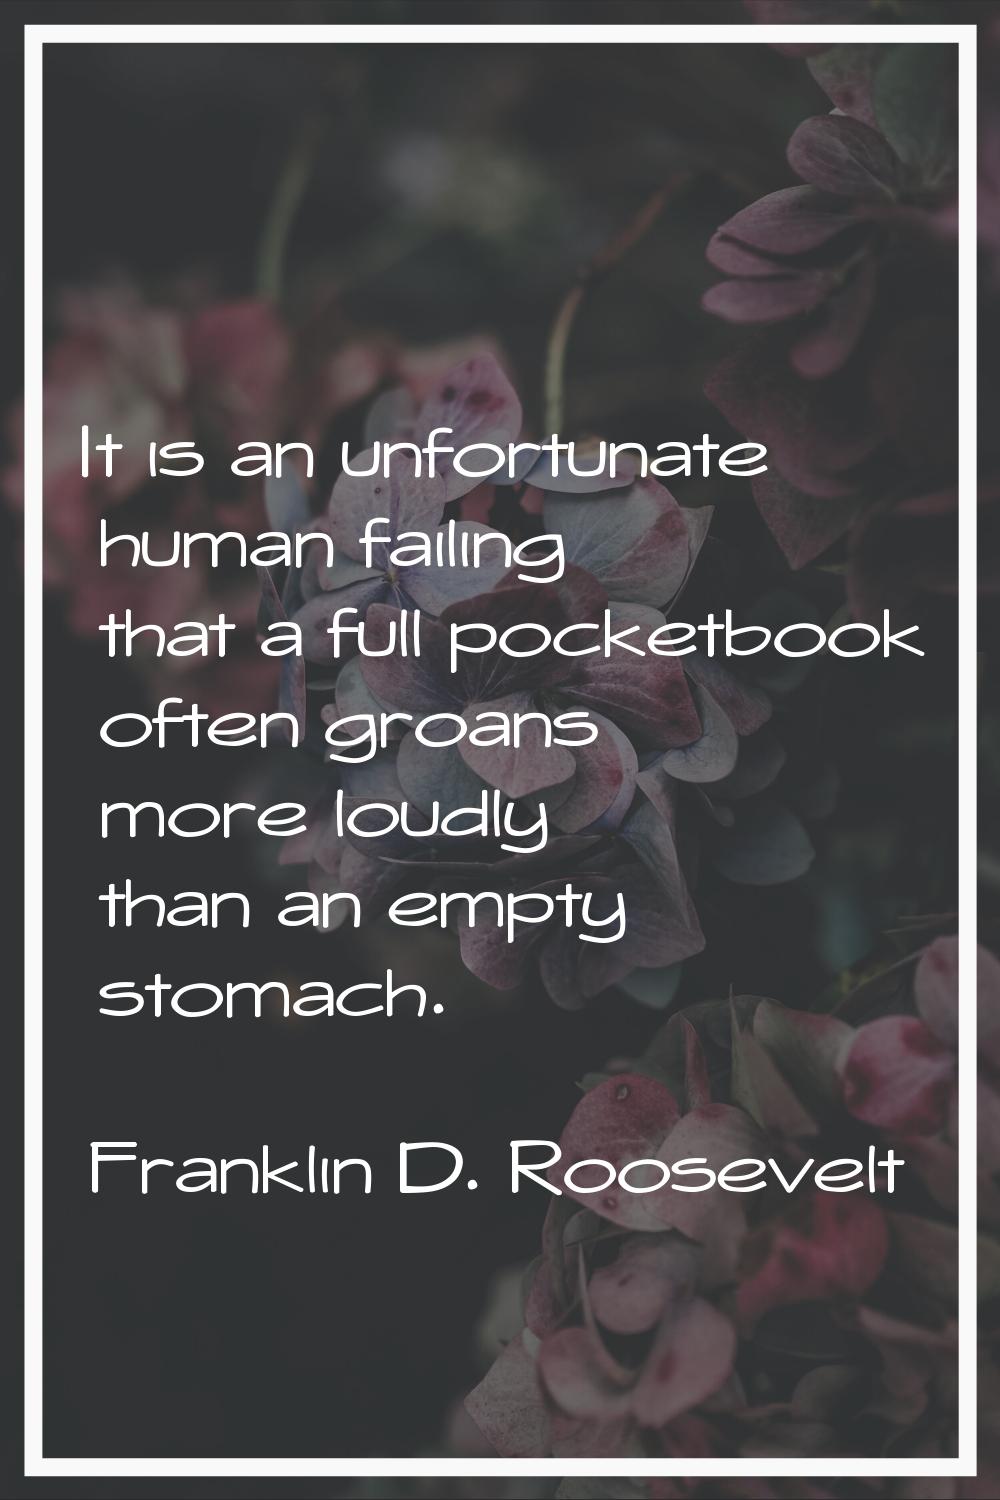 It is an unfortunate human failing that a full pocketbook often groans more loudly than an empty st